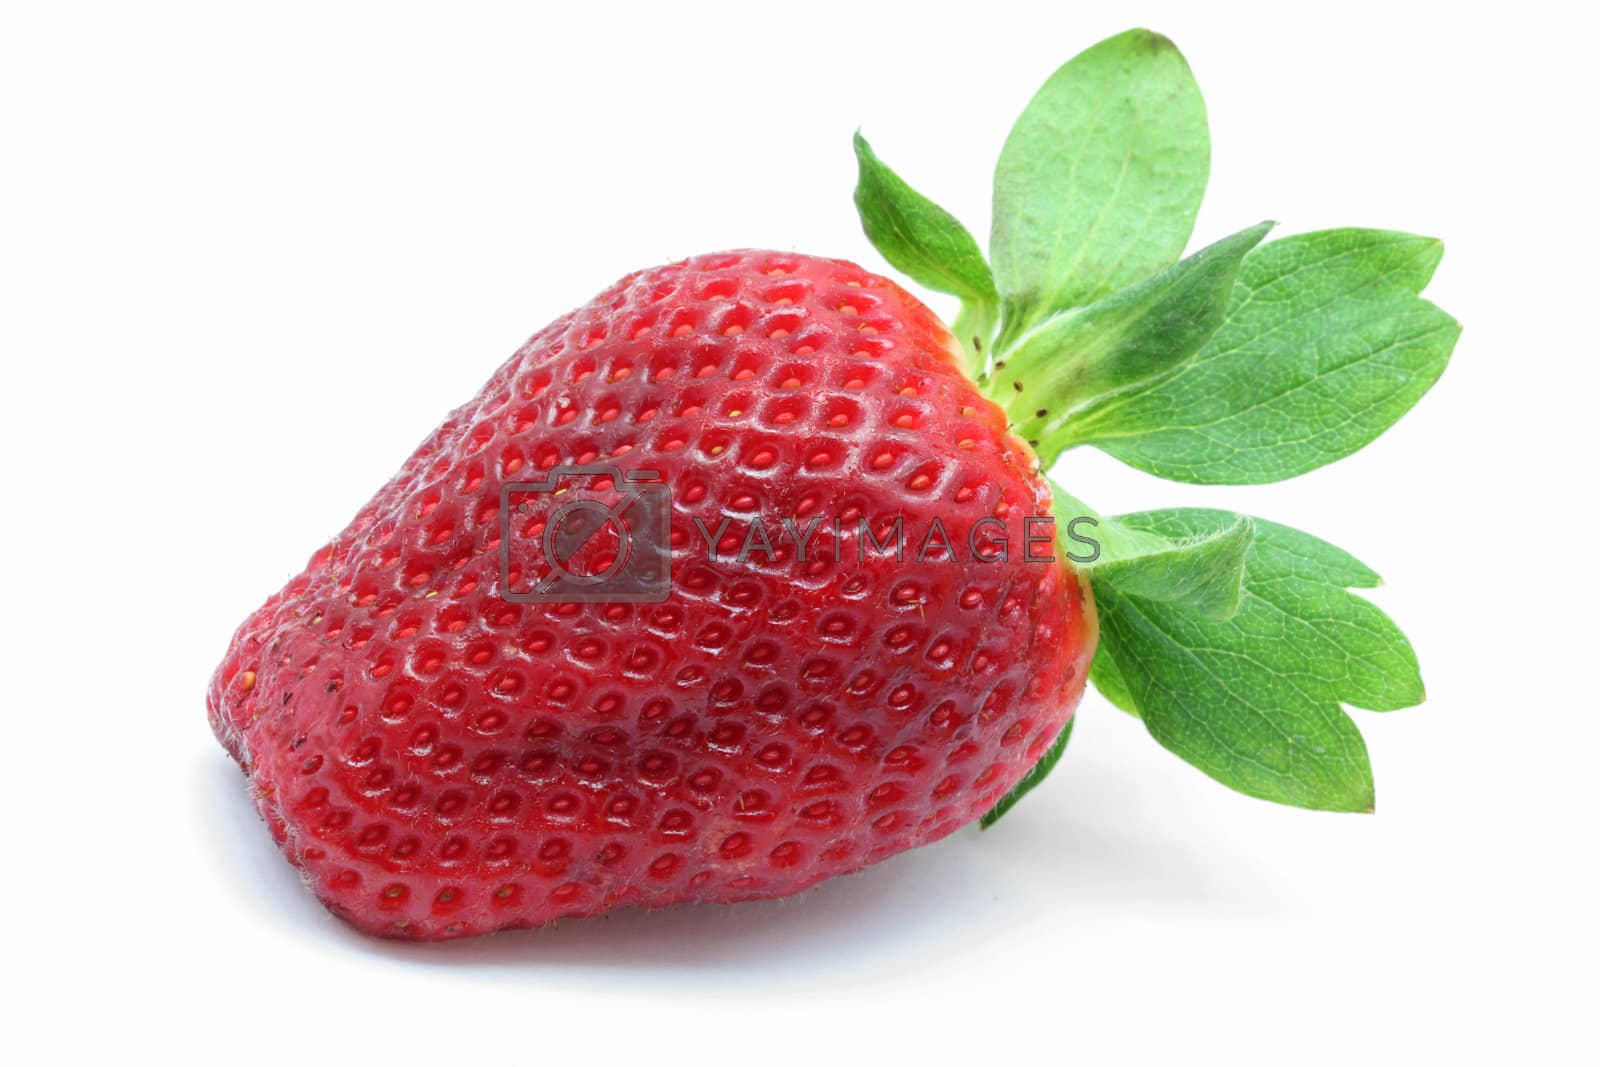 Royalty free image of Strawberry by vichie81